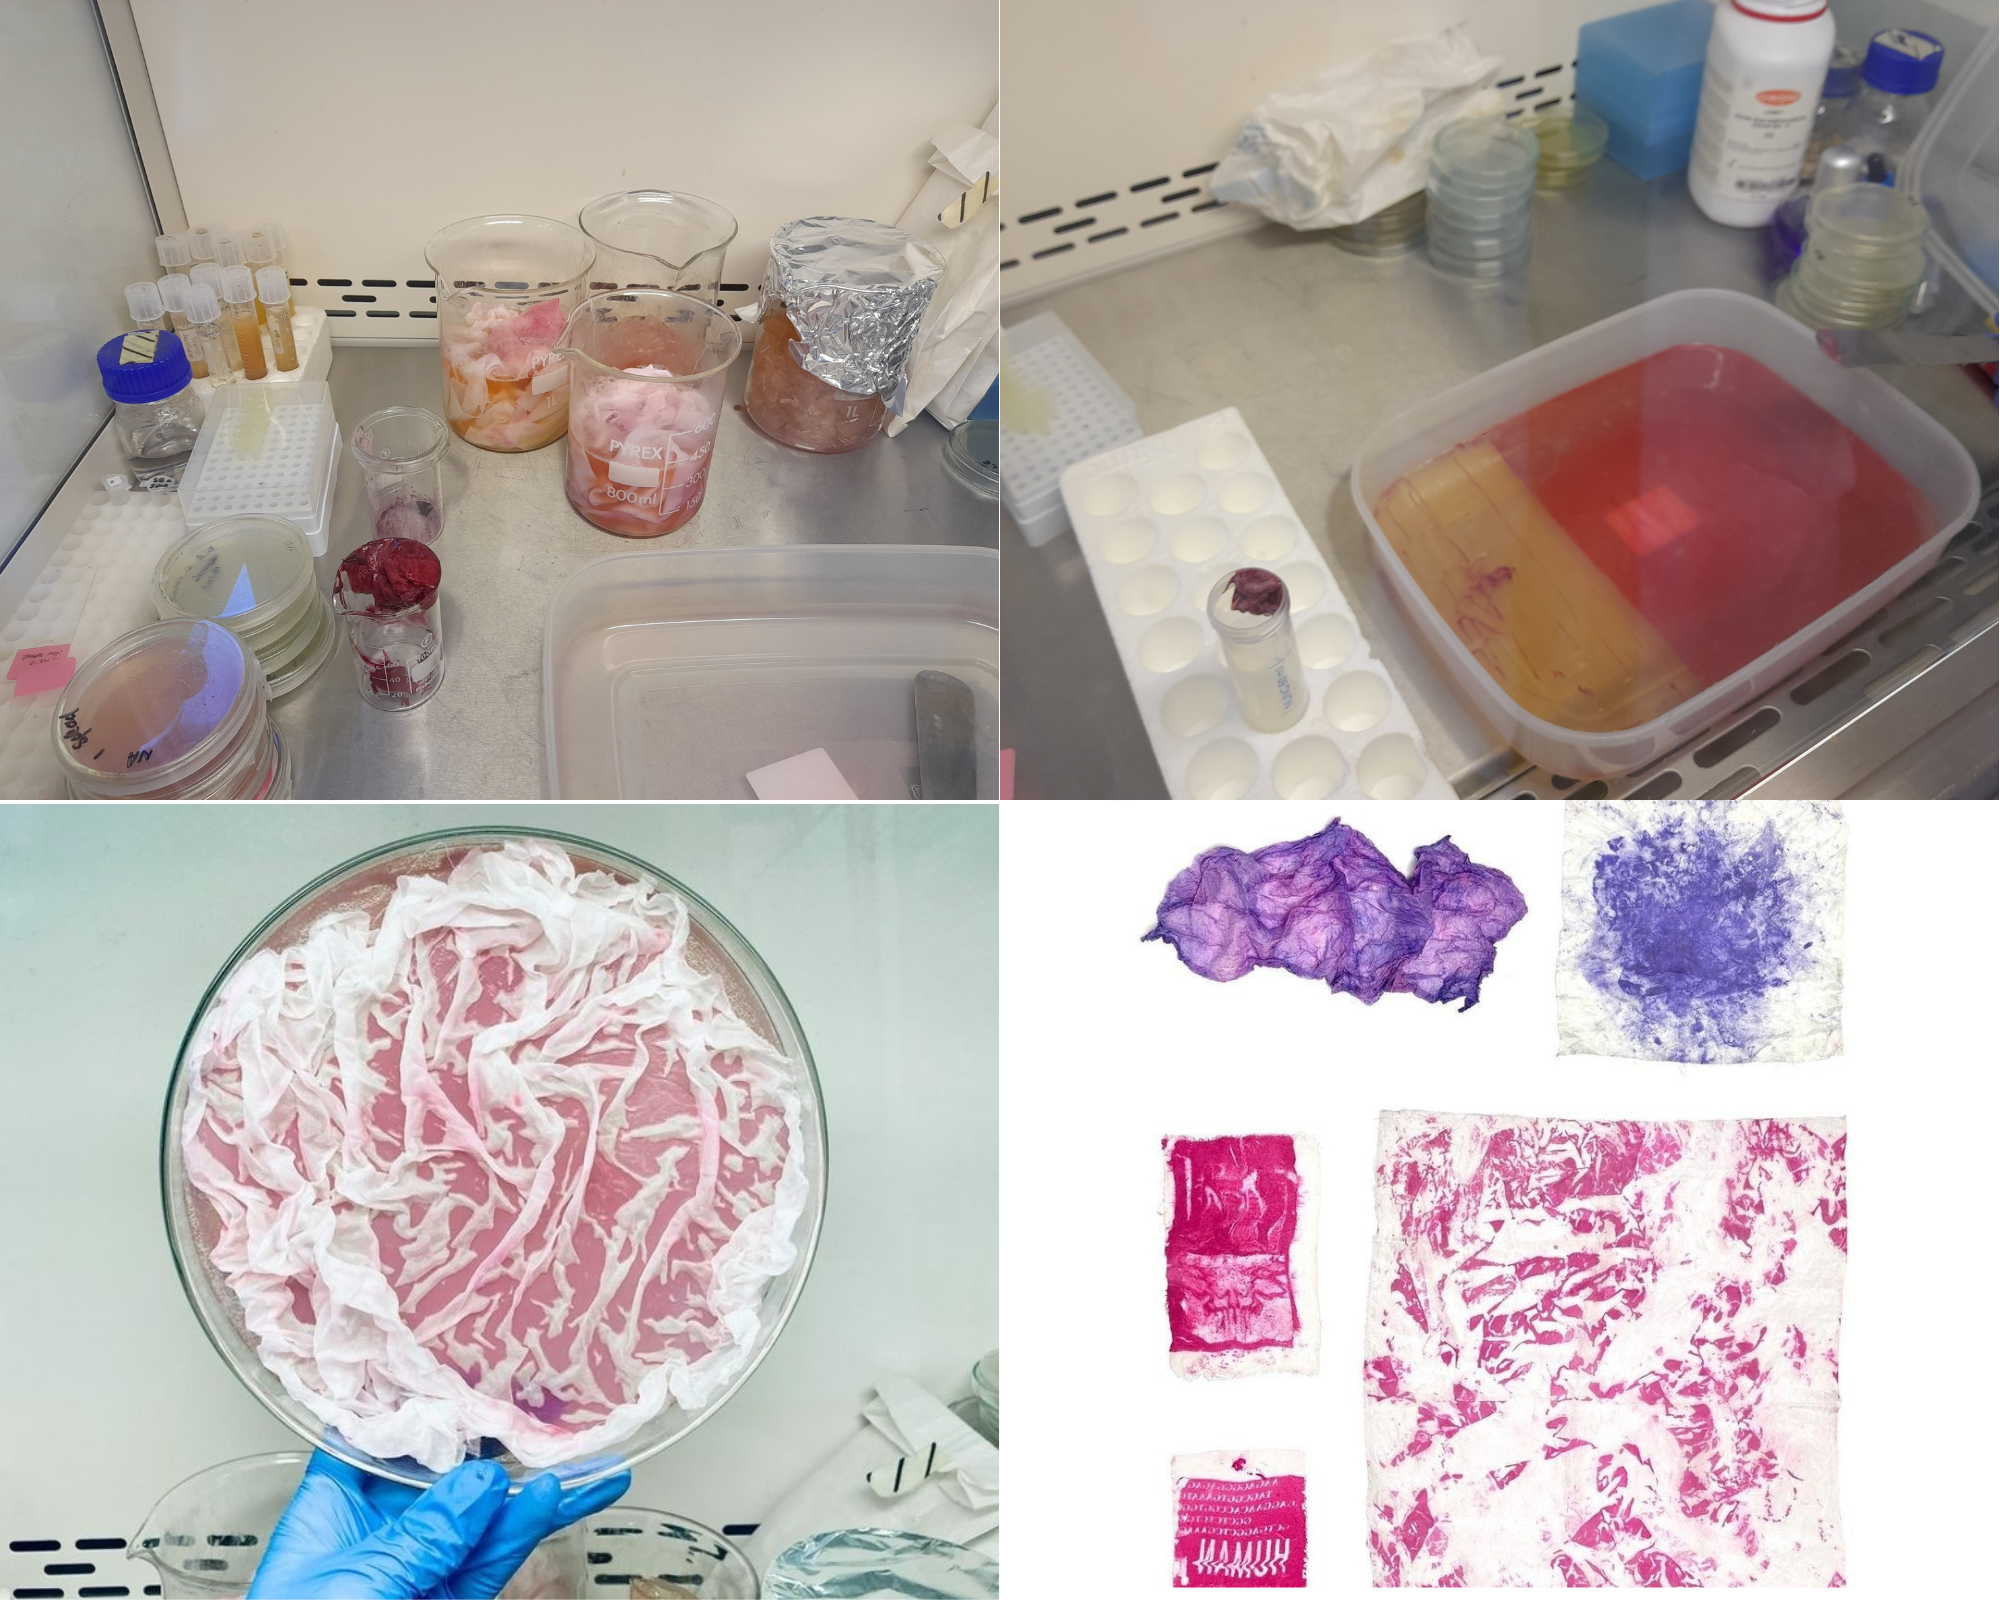 Kexin Liu – Using pigmented bacteria to dye textiles. Artwork and Images by Kexin Liu